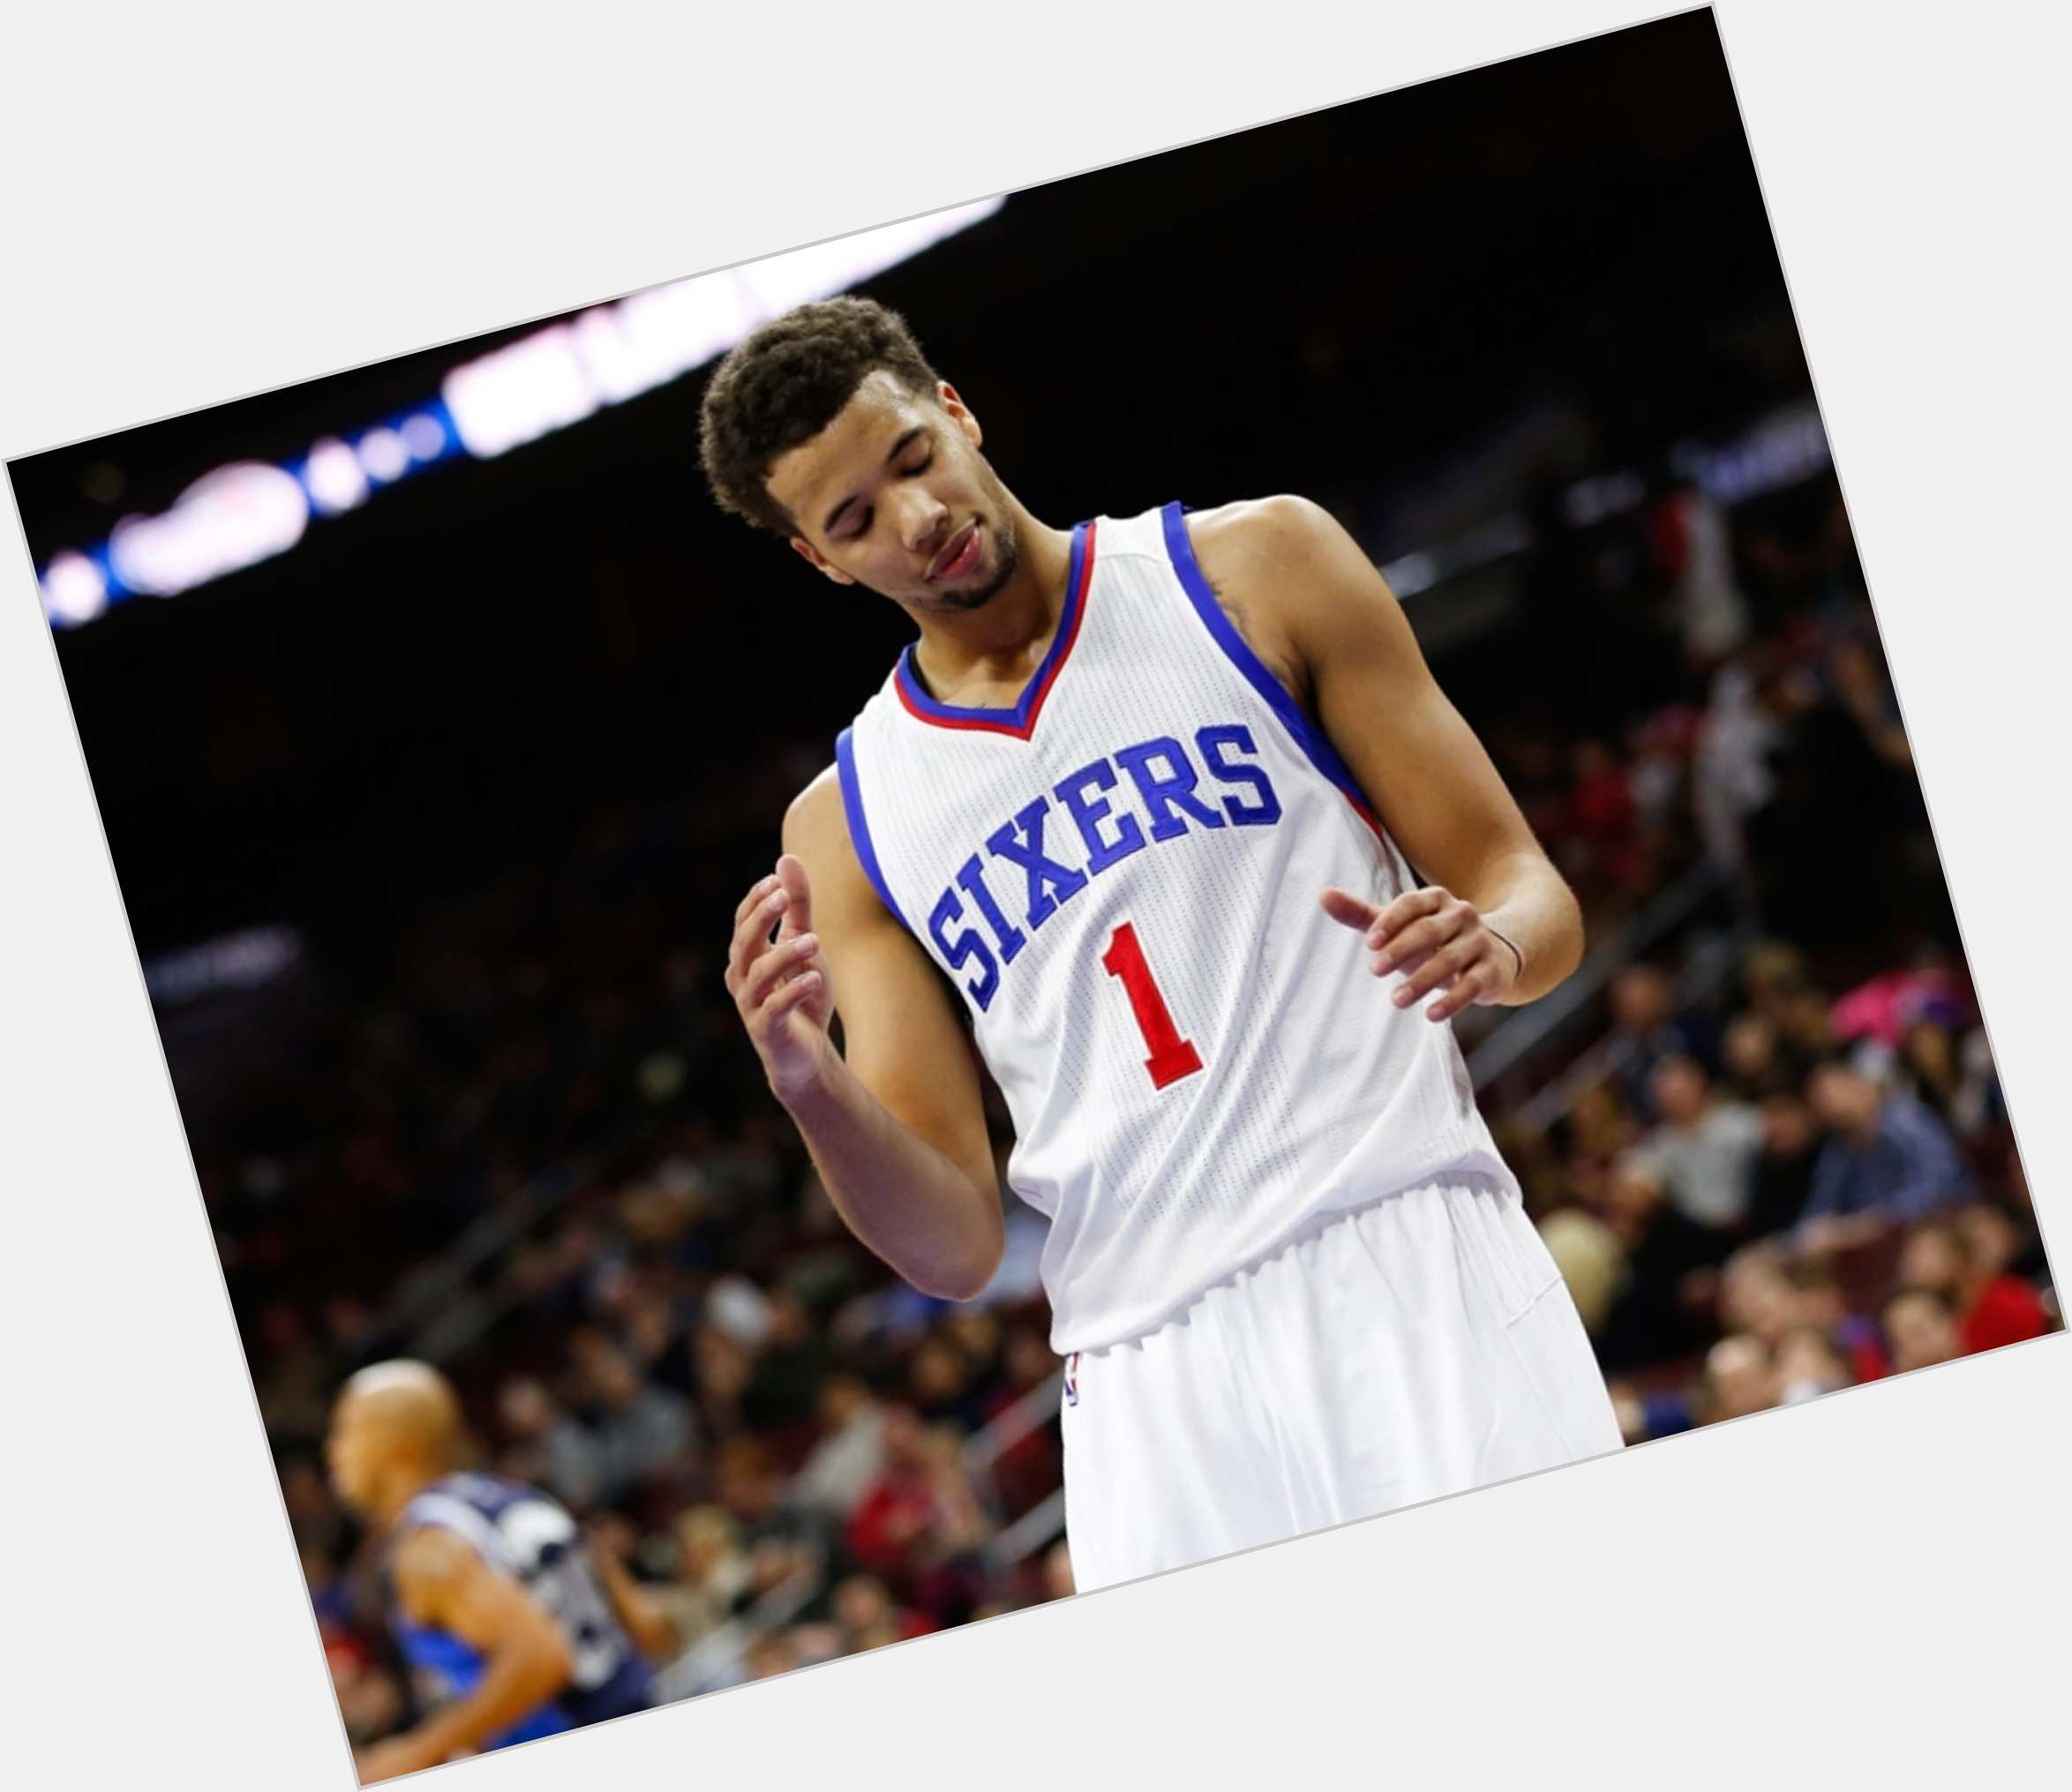 Http://fanpagepress.net/m/M/Michael Carter Williams Hairstyle 3